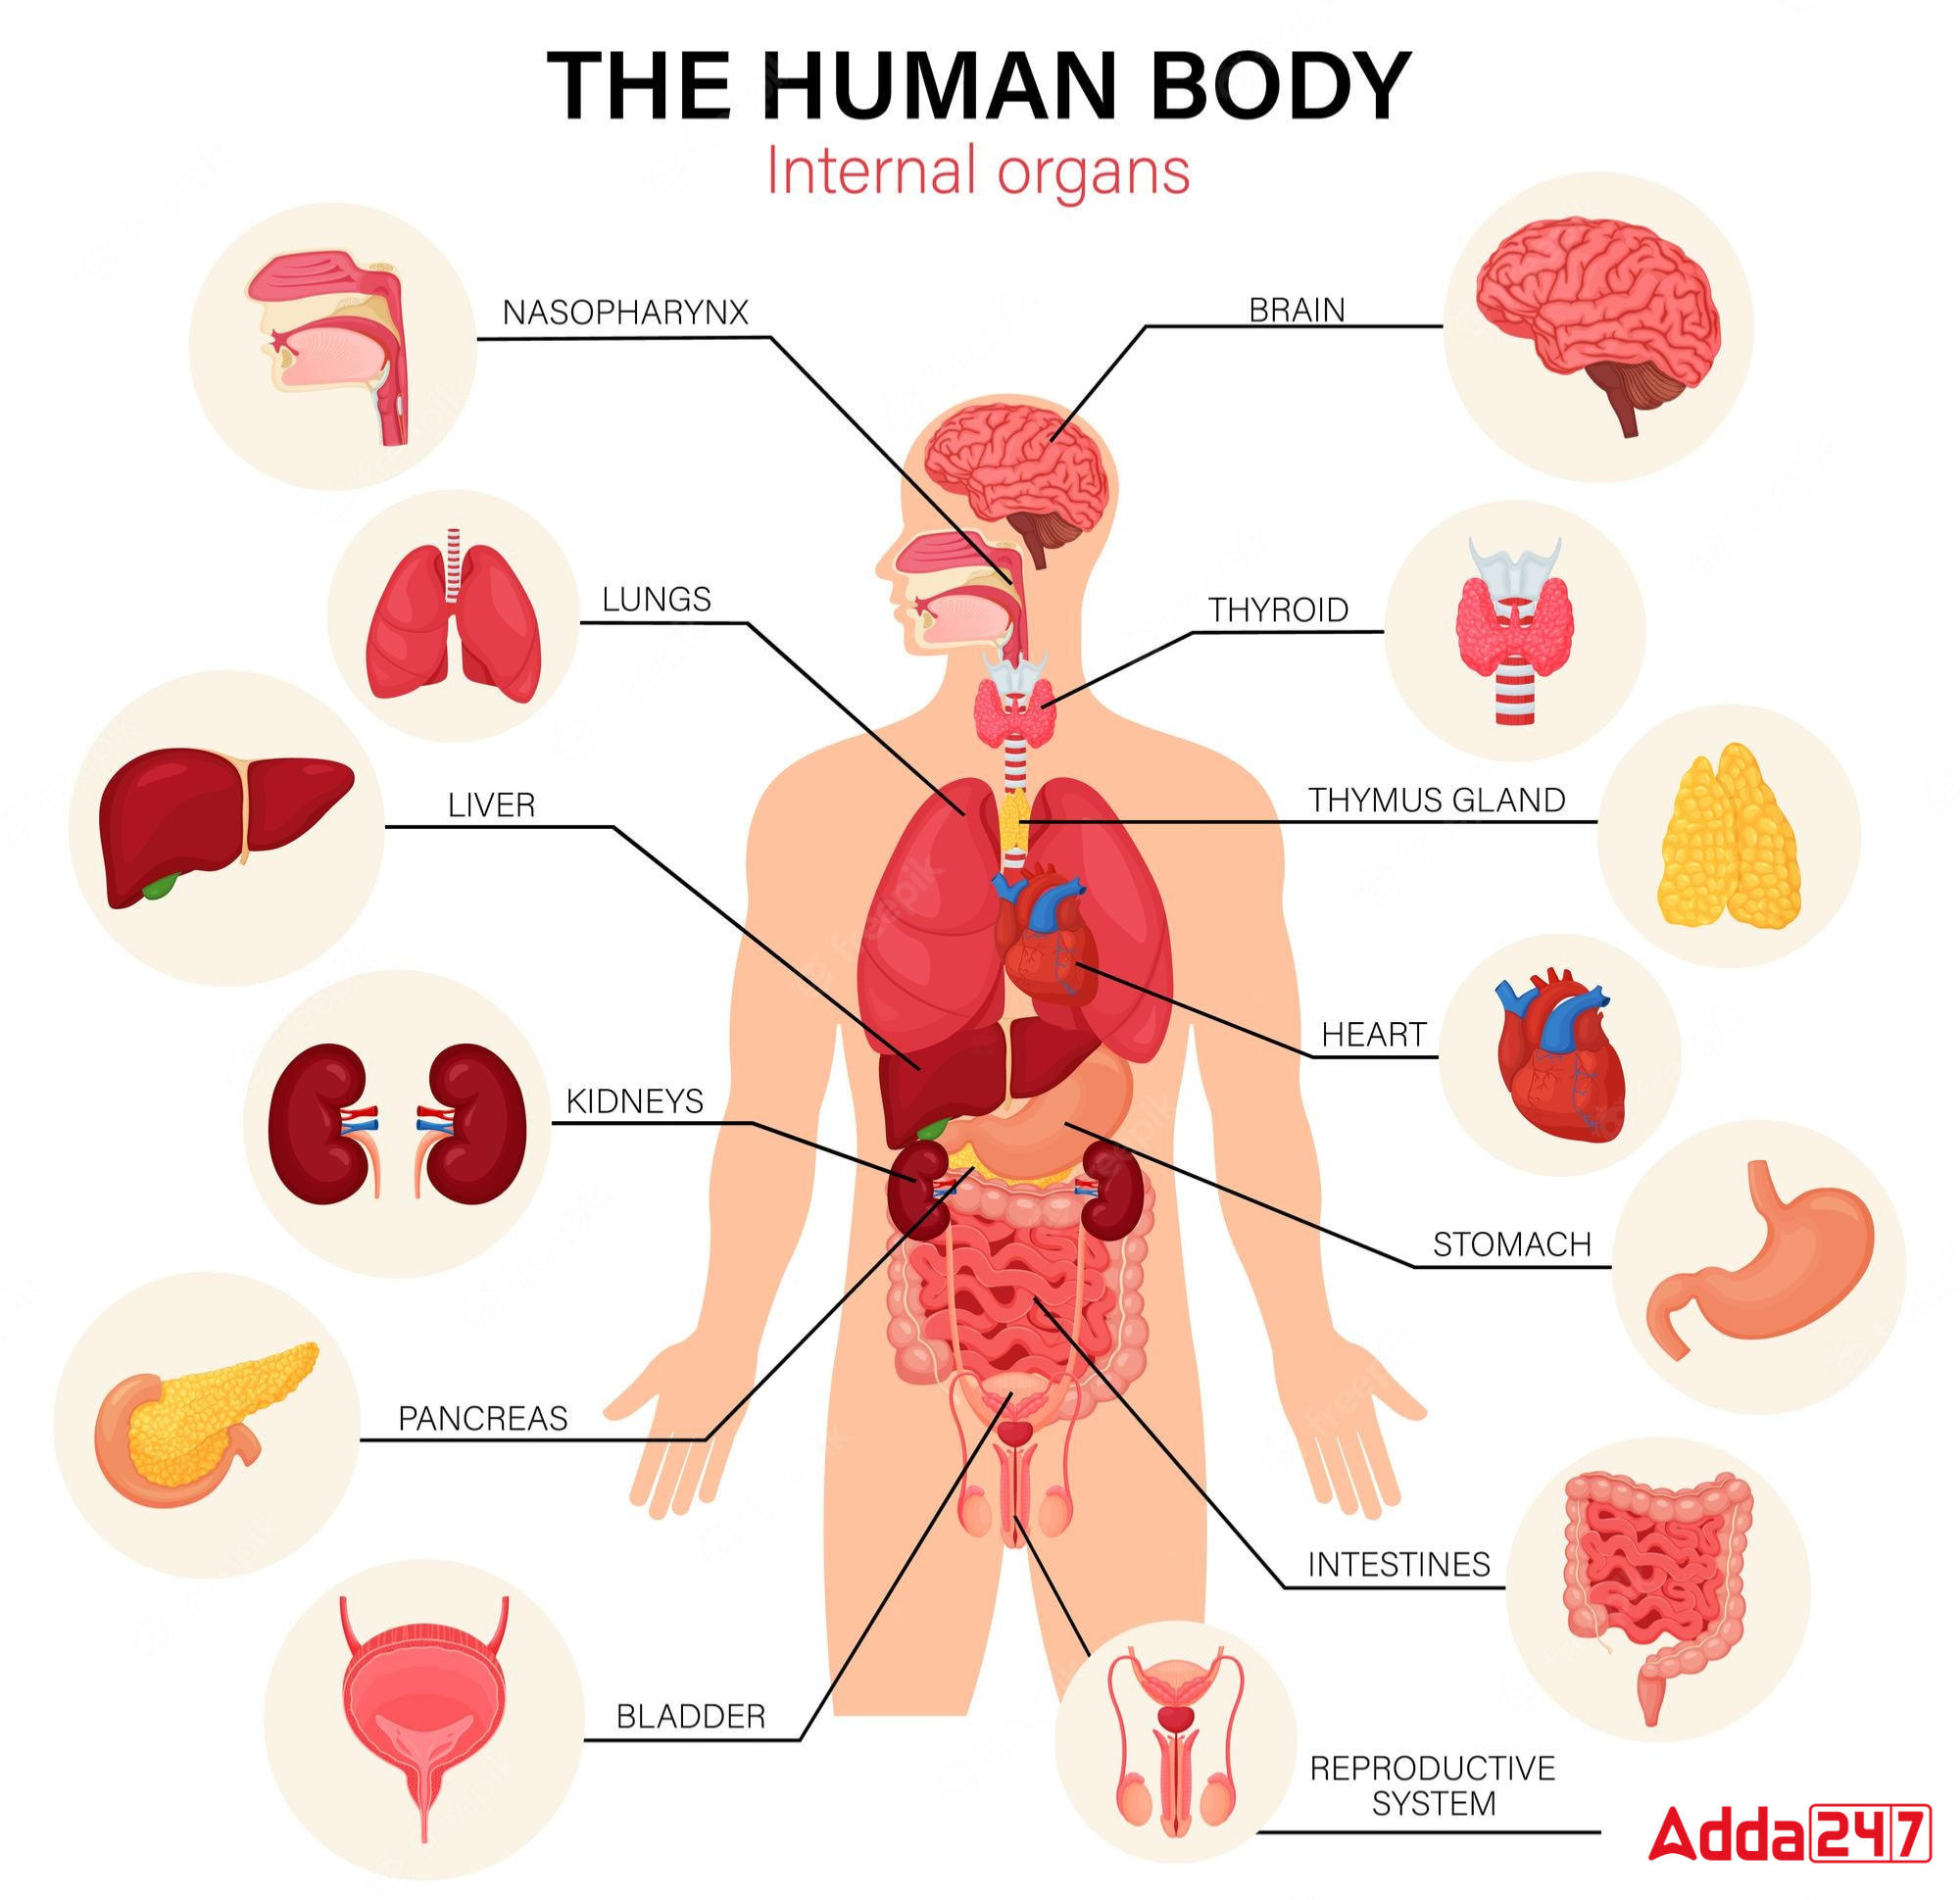 50 Body Parts Name in English with Pictures_4.1